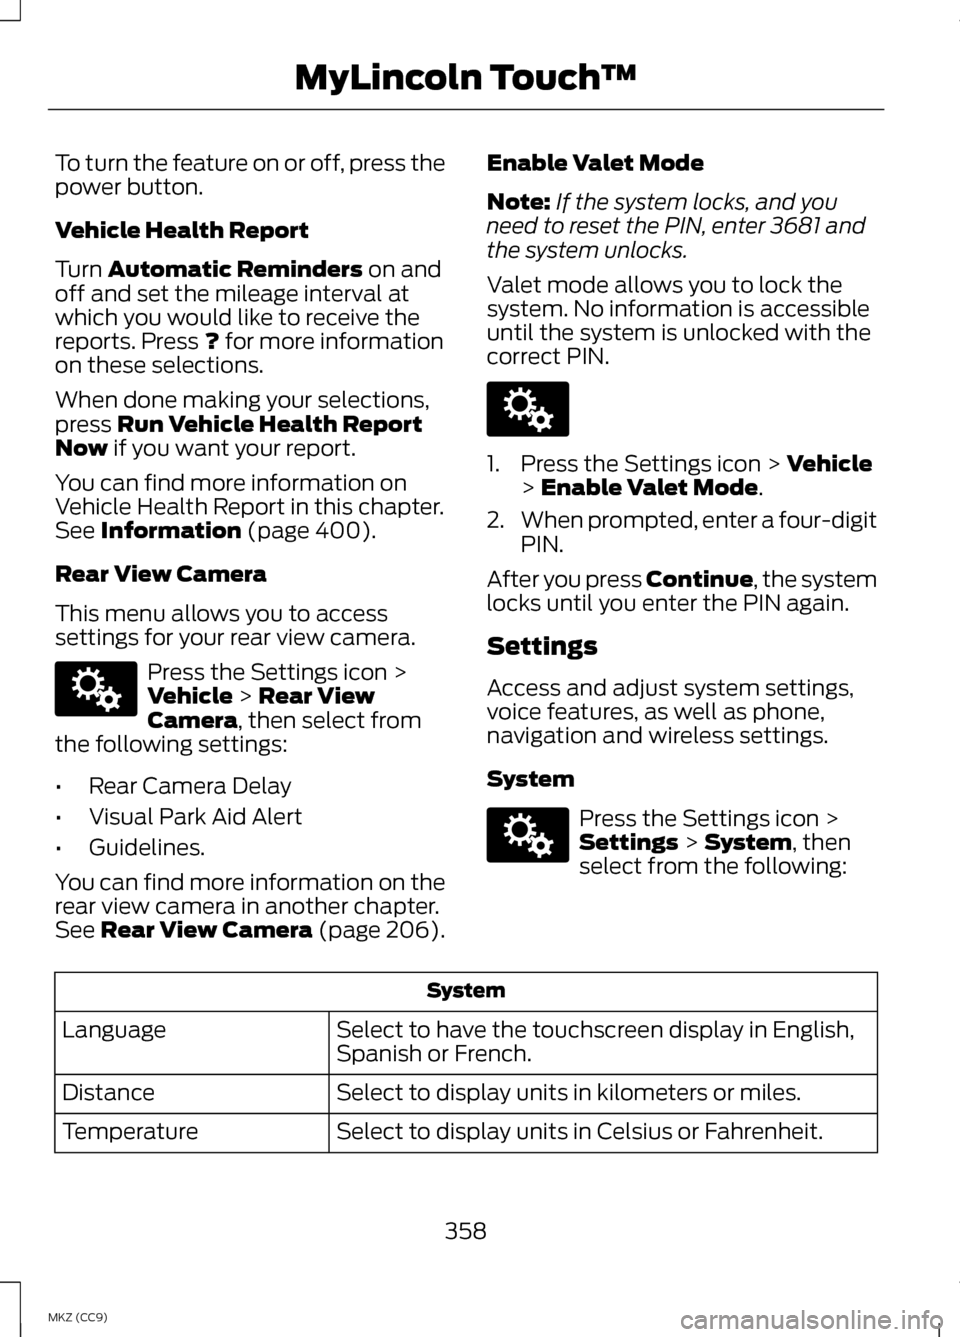 LINCOLN MKZ HYBRID 2013  Owners Manual To turn the feature on or off, press the
power button.
Vehicle Health Report
Turn Automatic Reminders on and
off and set the mileage interval at
which you would like to receive the
reports. Press 
? f